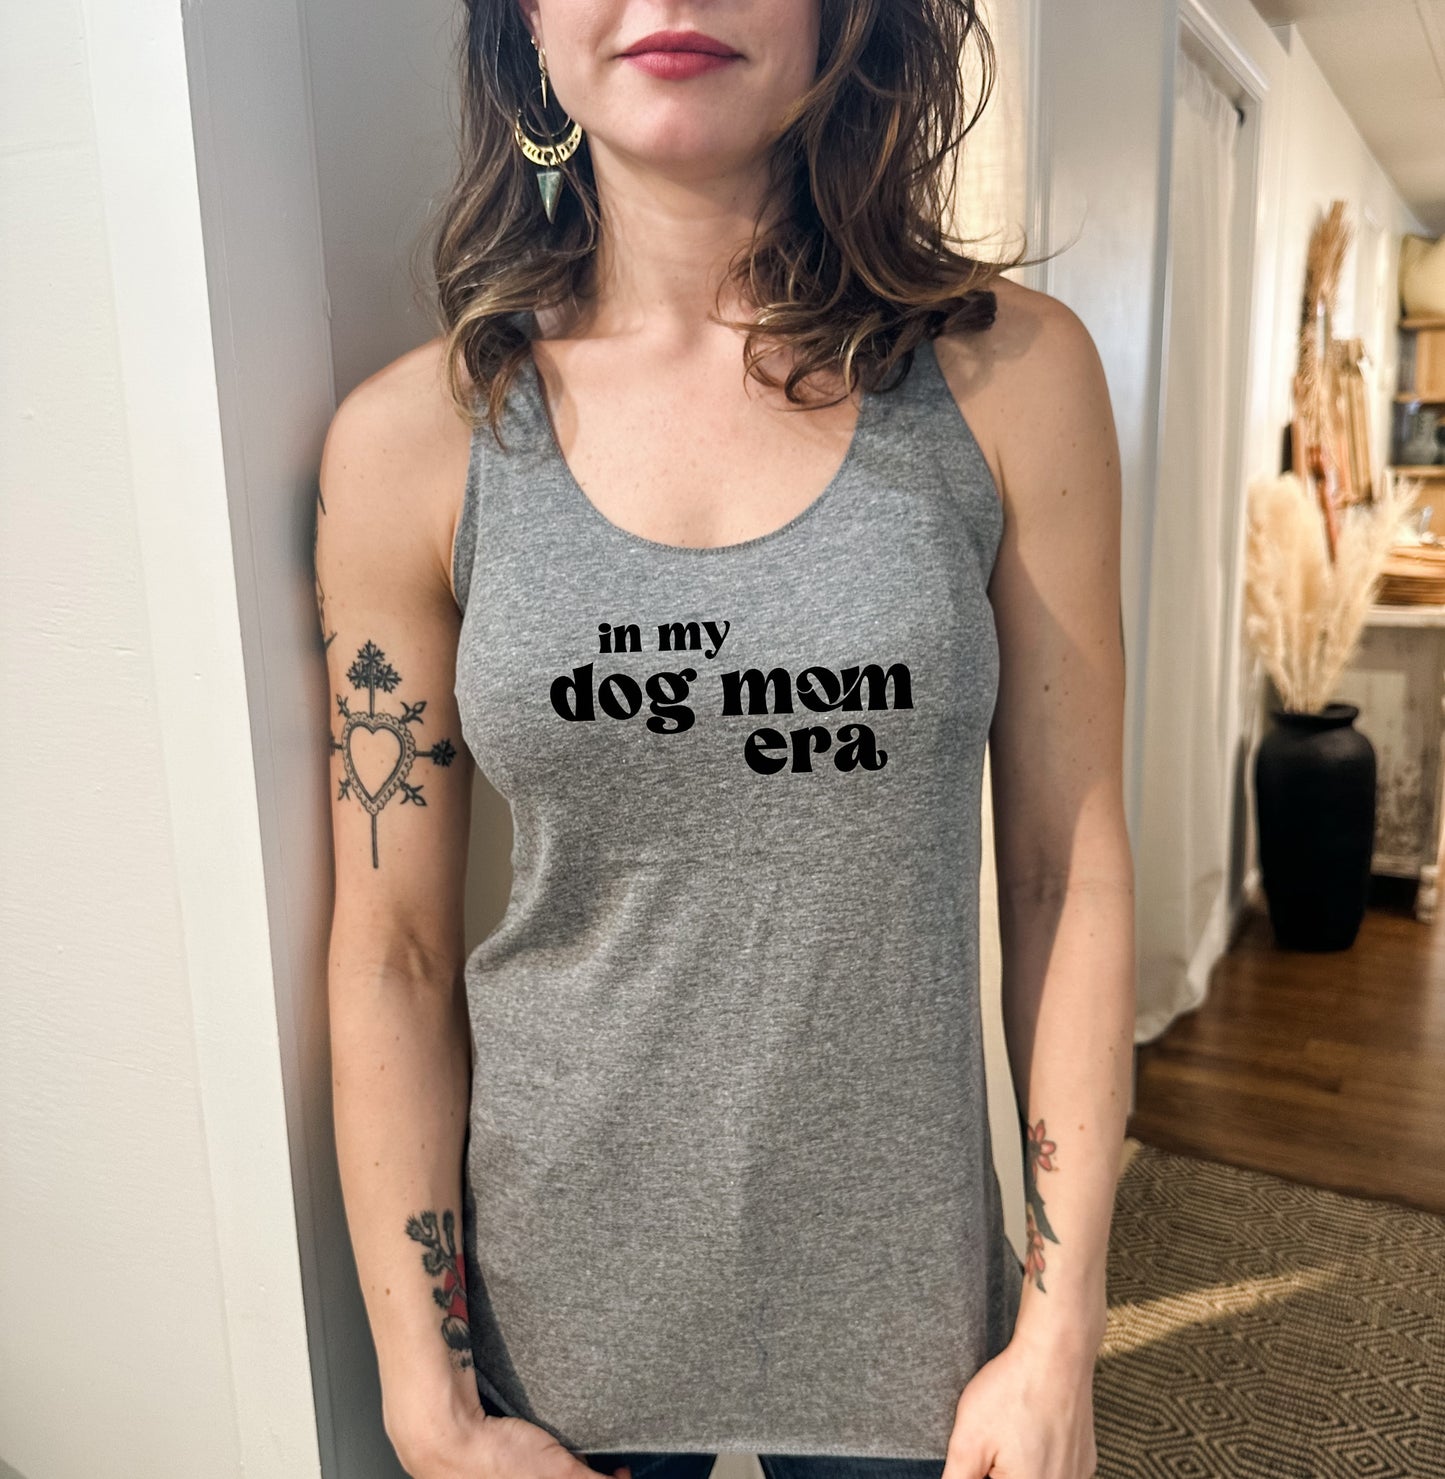 a woman wearing a tank top that says, in my mom's arms